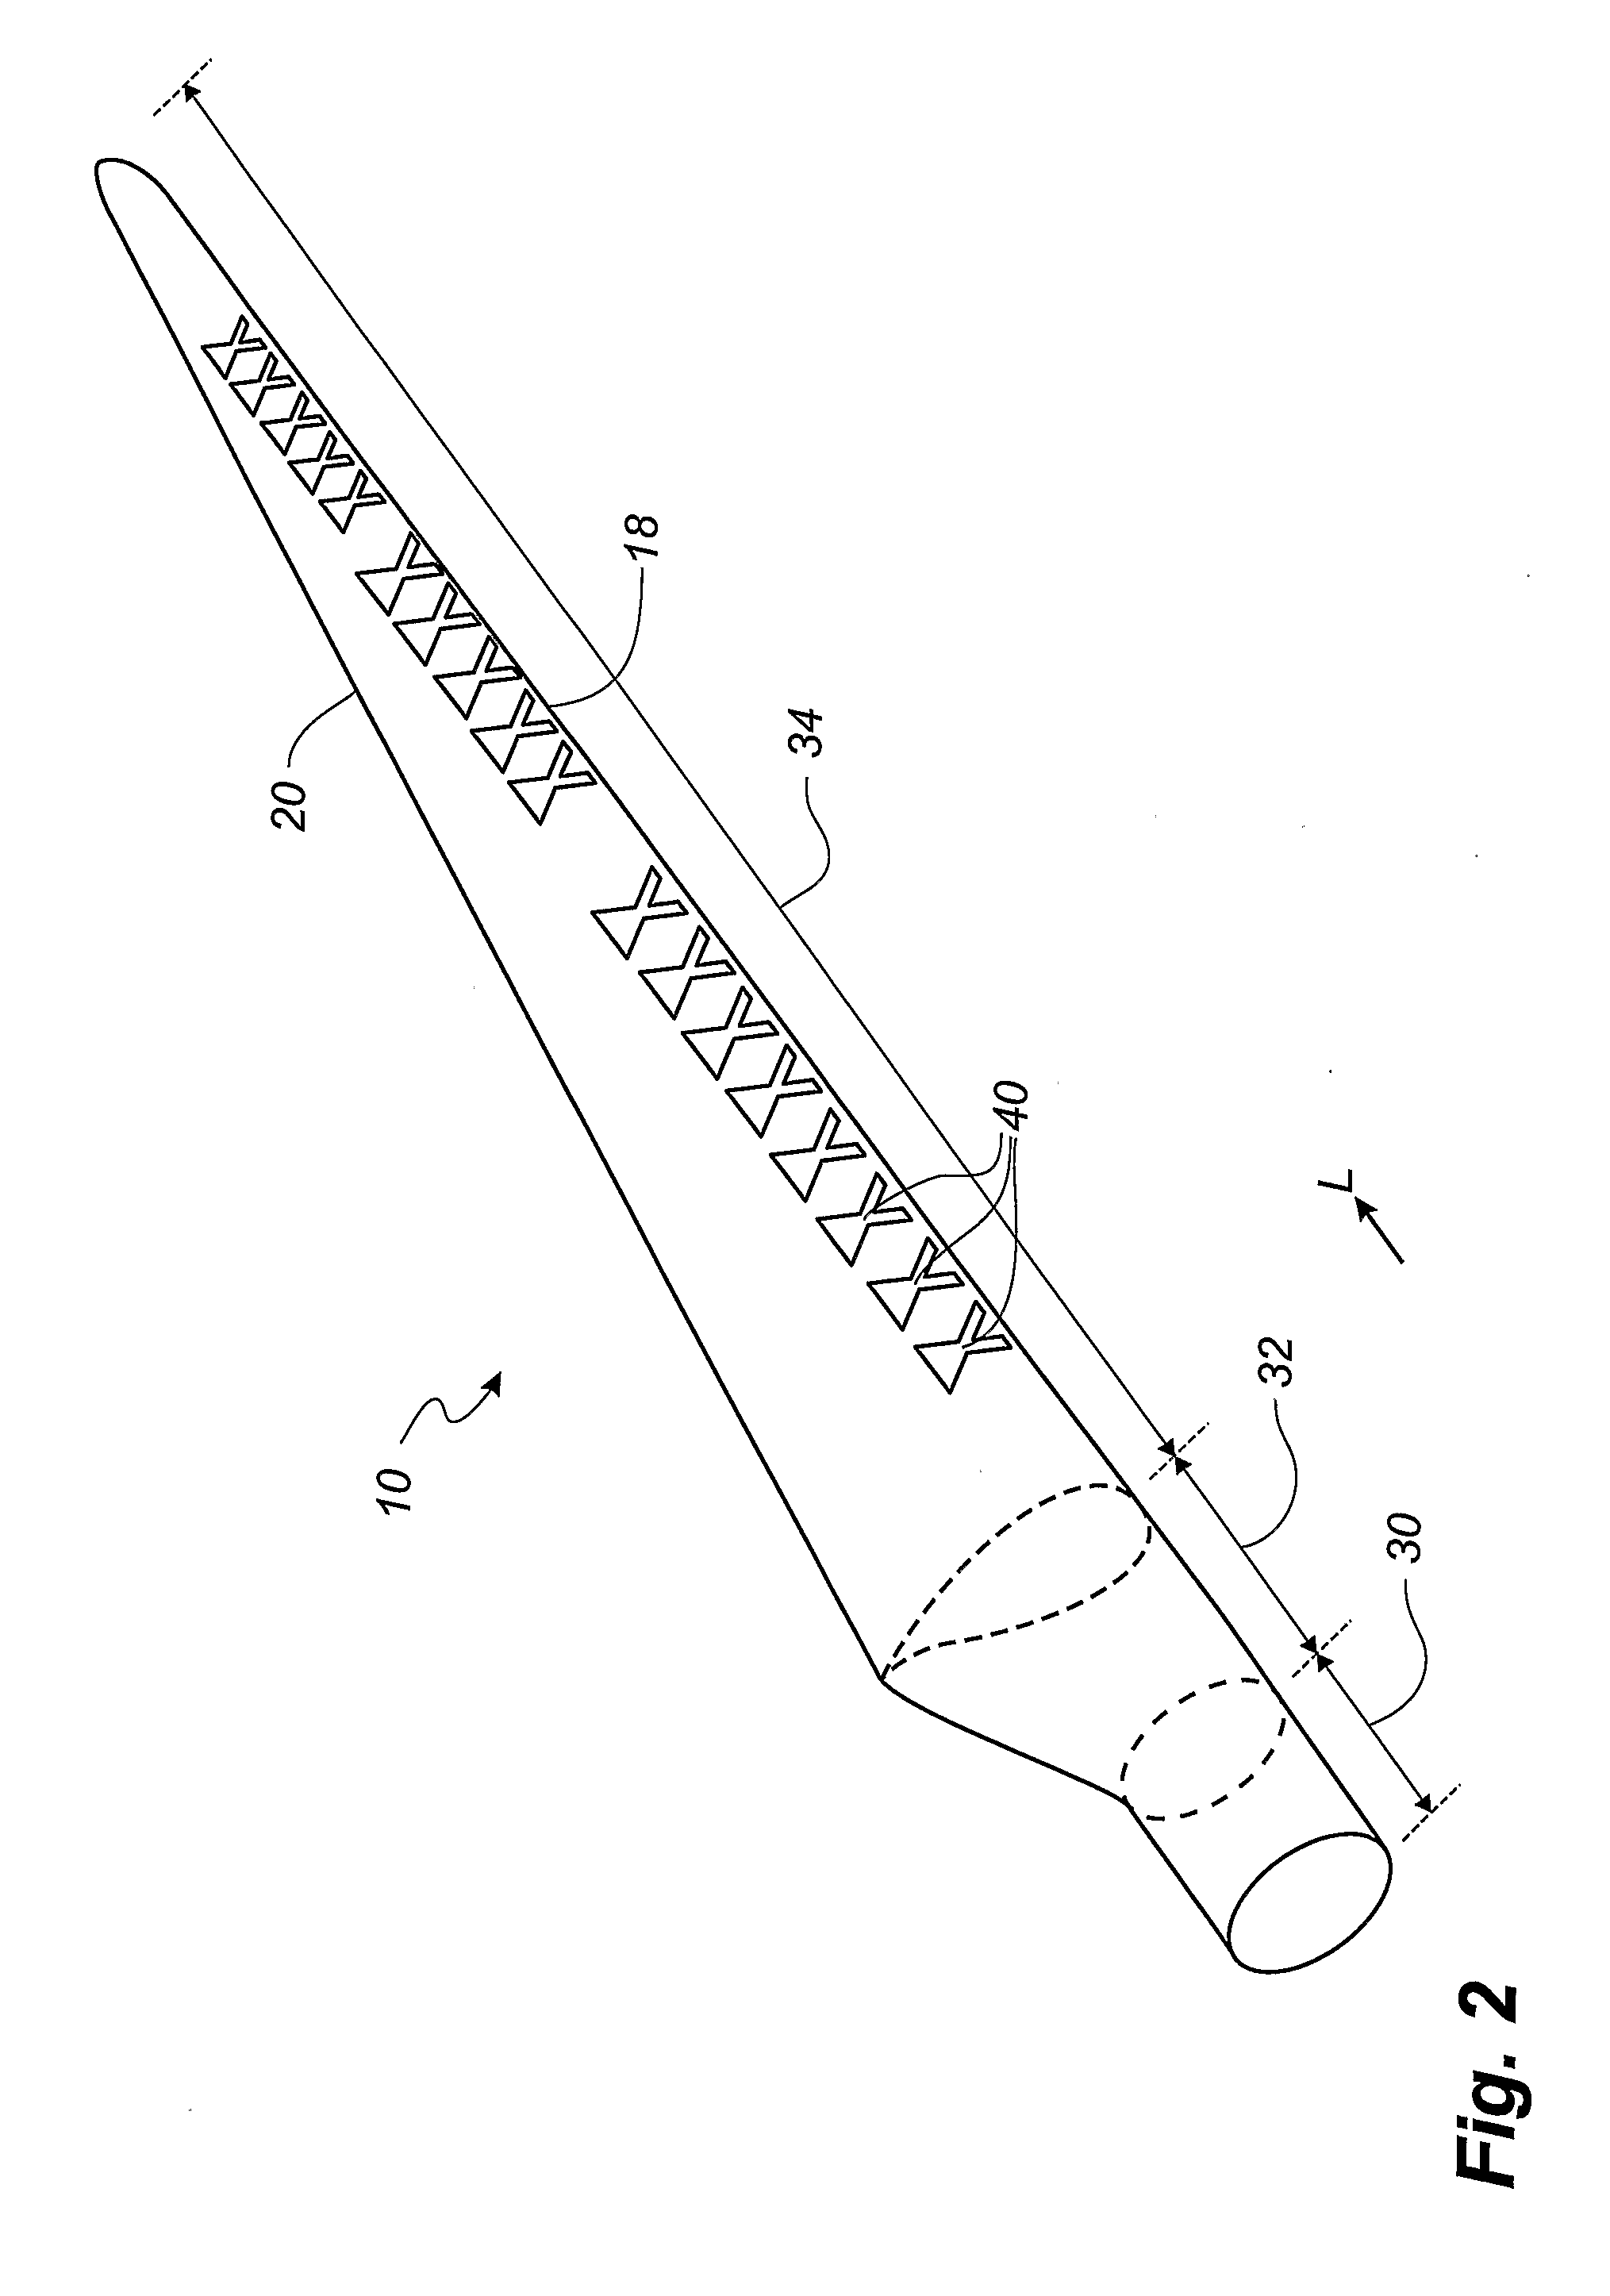 Wind turbine blade with submerged boundary layer  control means comprising crossing sub-channels